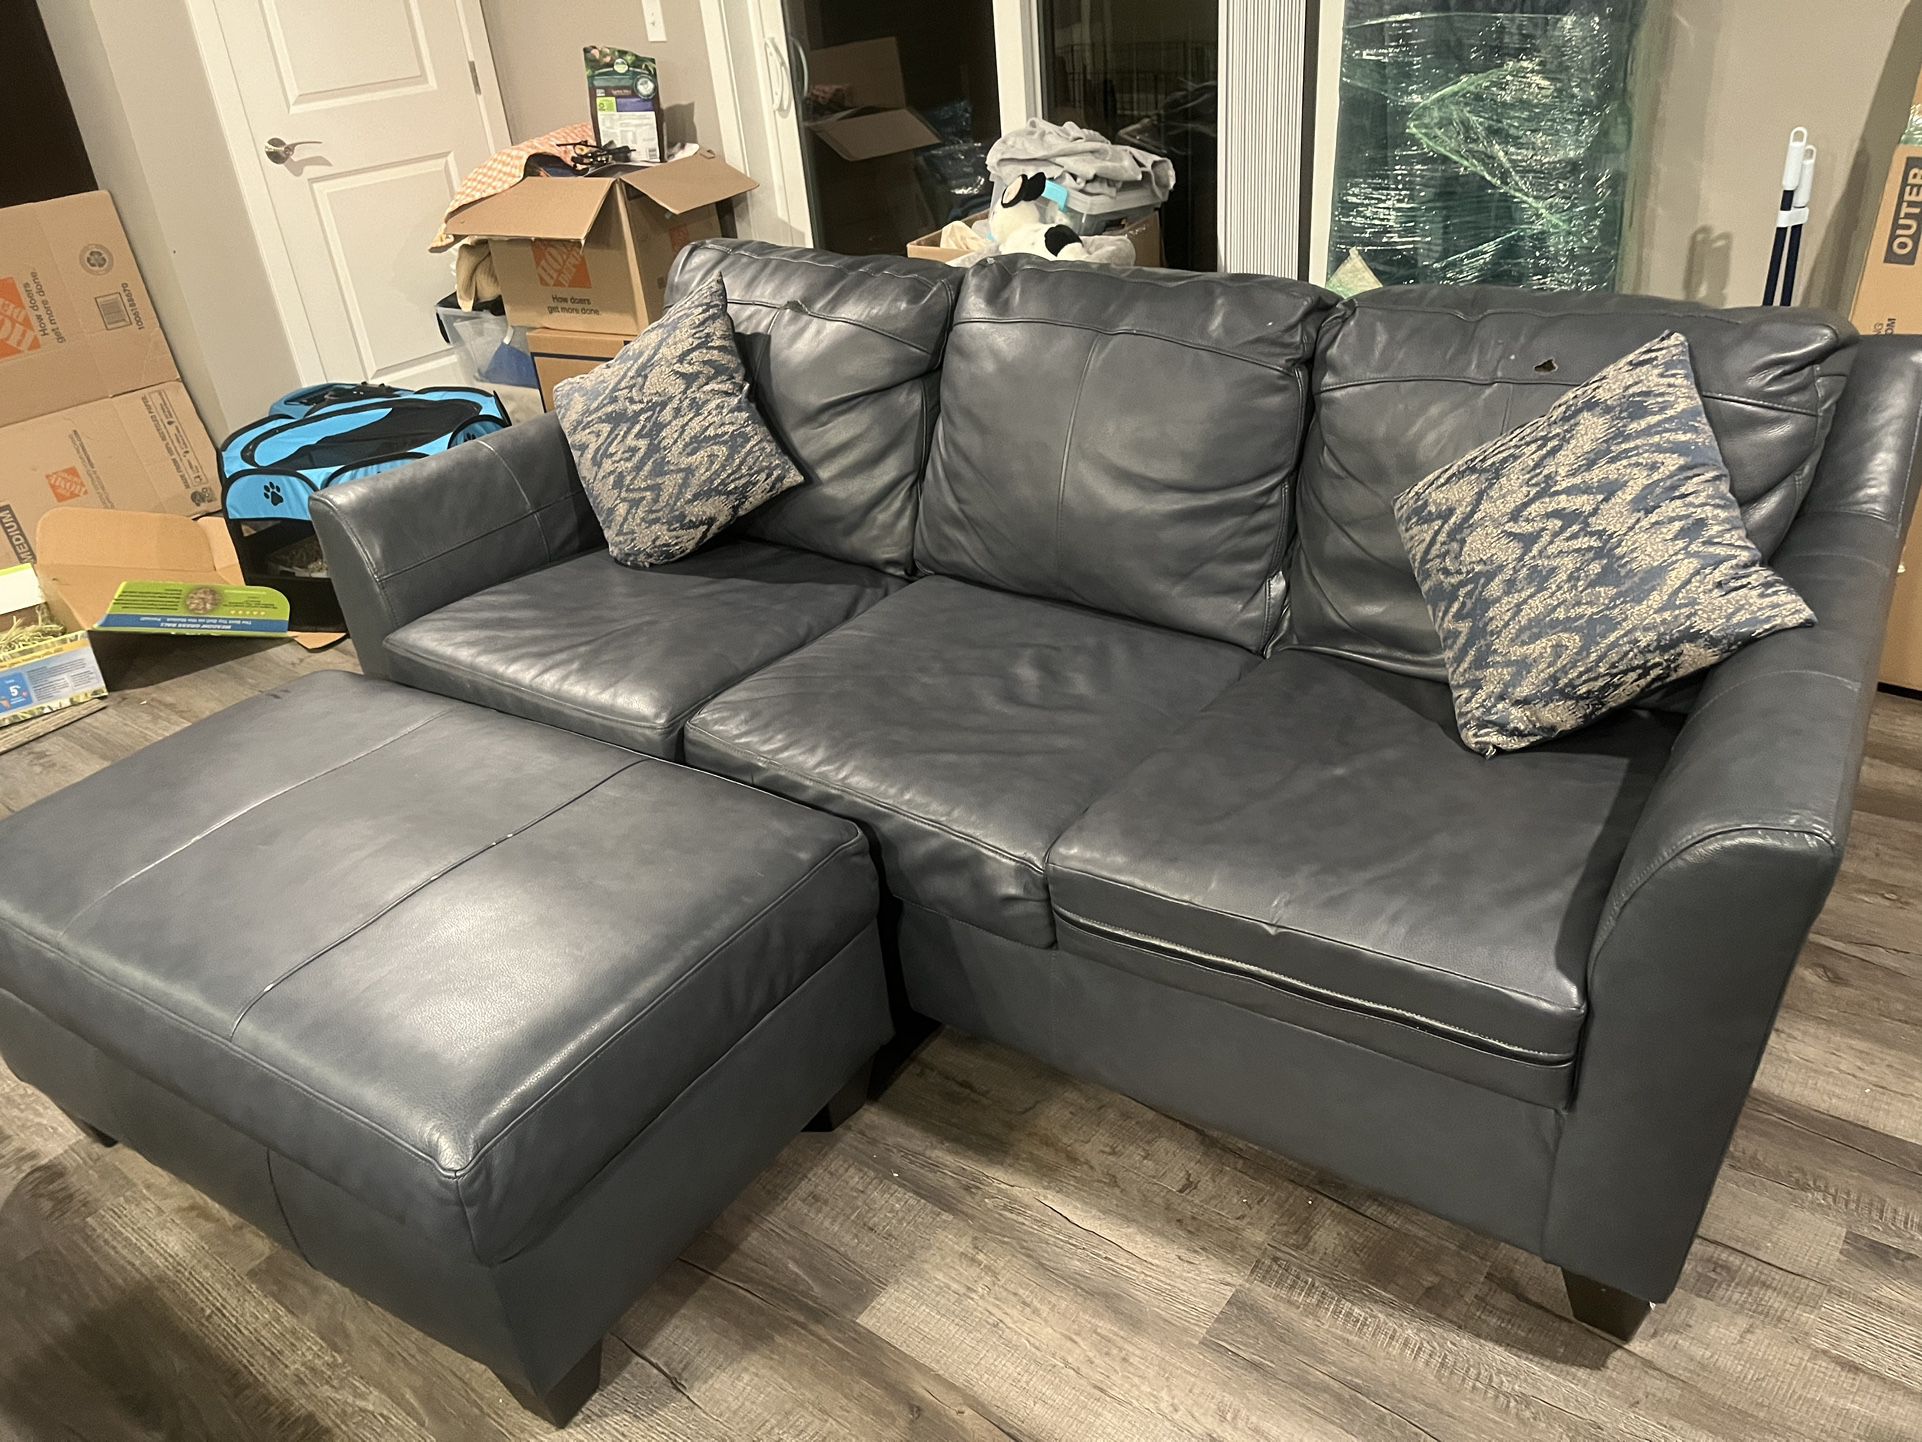 Blue/Grey Leather Couch/Sofa, Storage Ottoman, and Matching Pillows